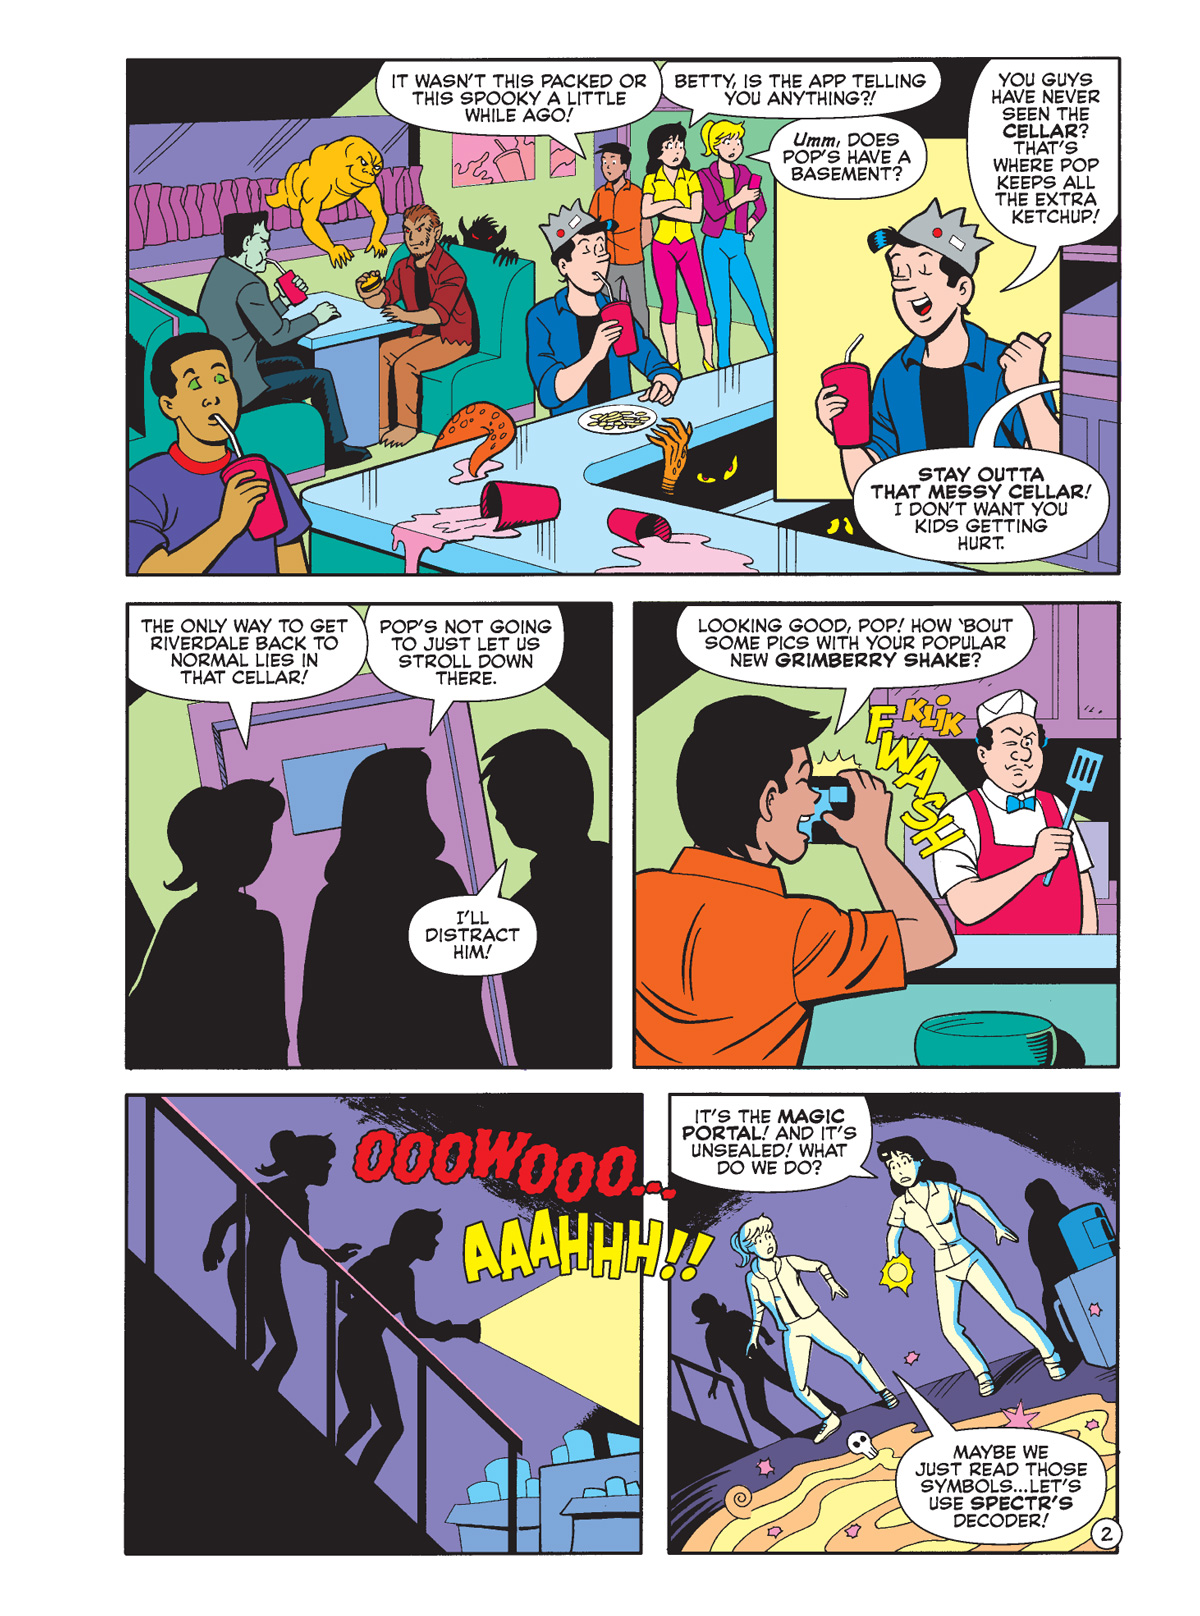 Betty and Veronica head to Pop's Chocklit Shoppe